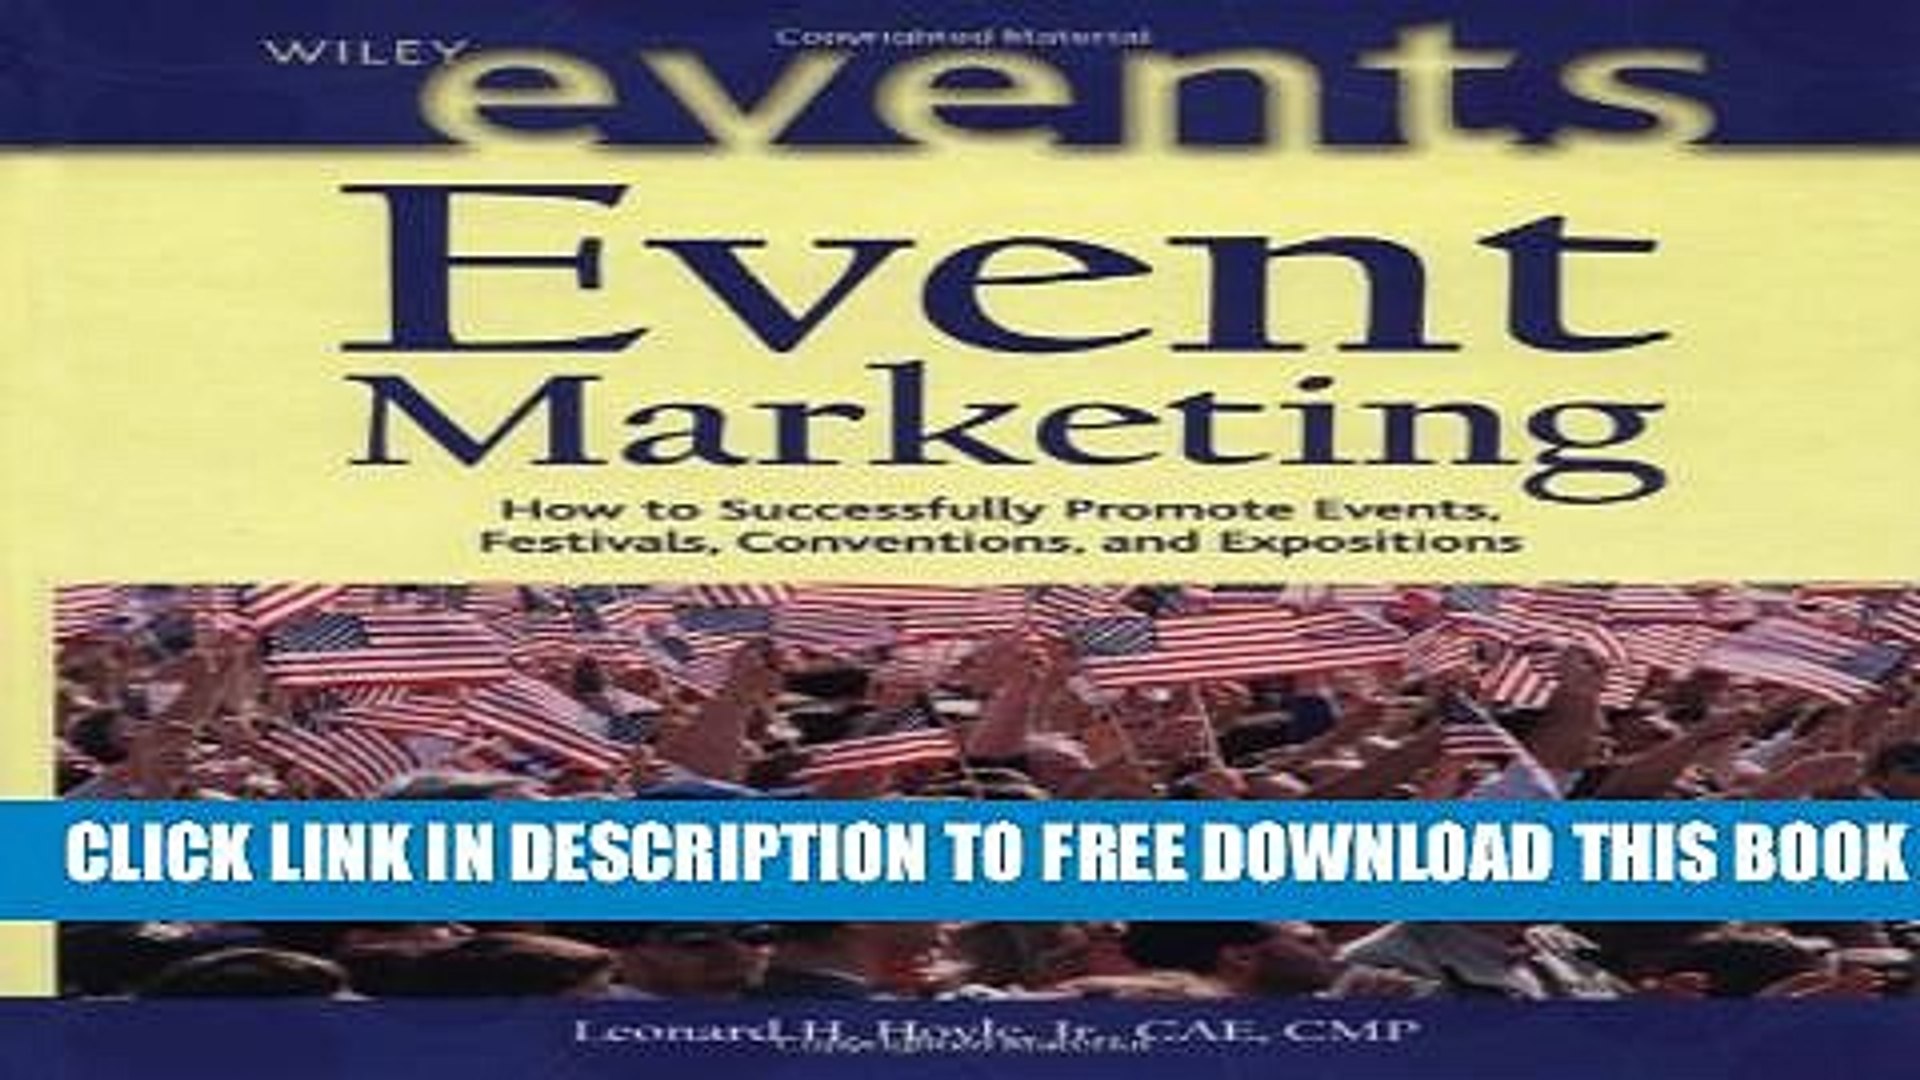 New Book Event Marketing: How to Successfully Promote Events, Festivals, Conventions, and